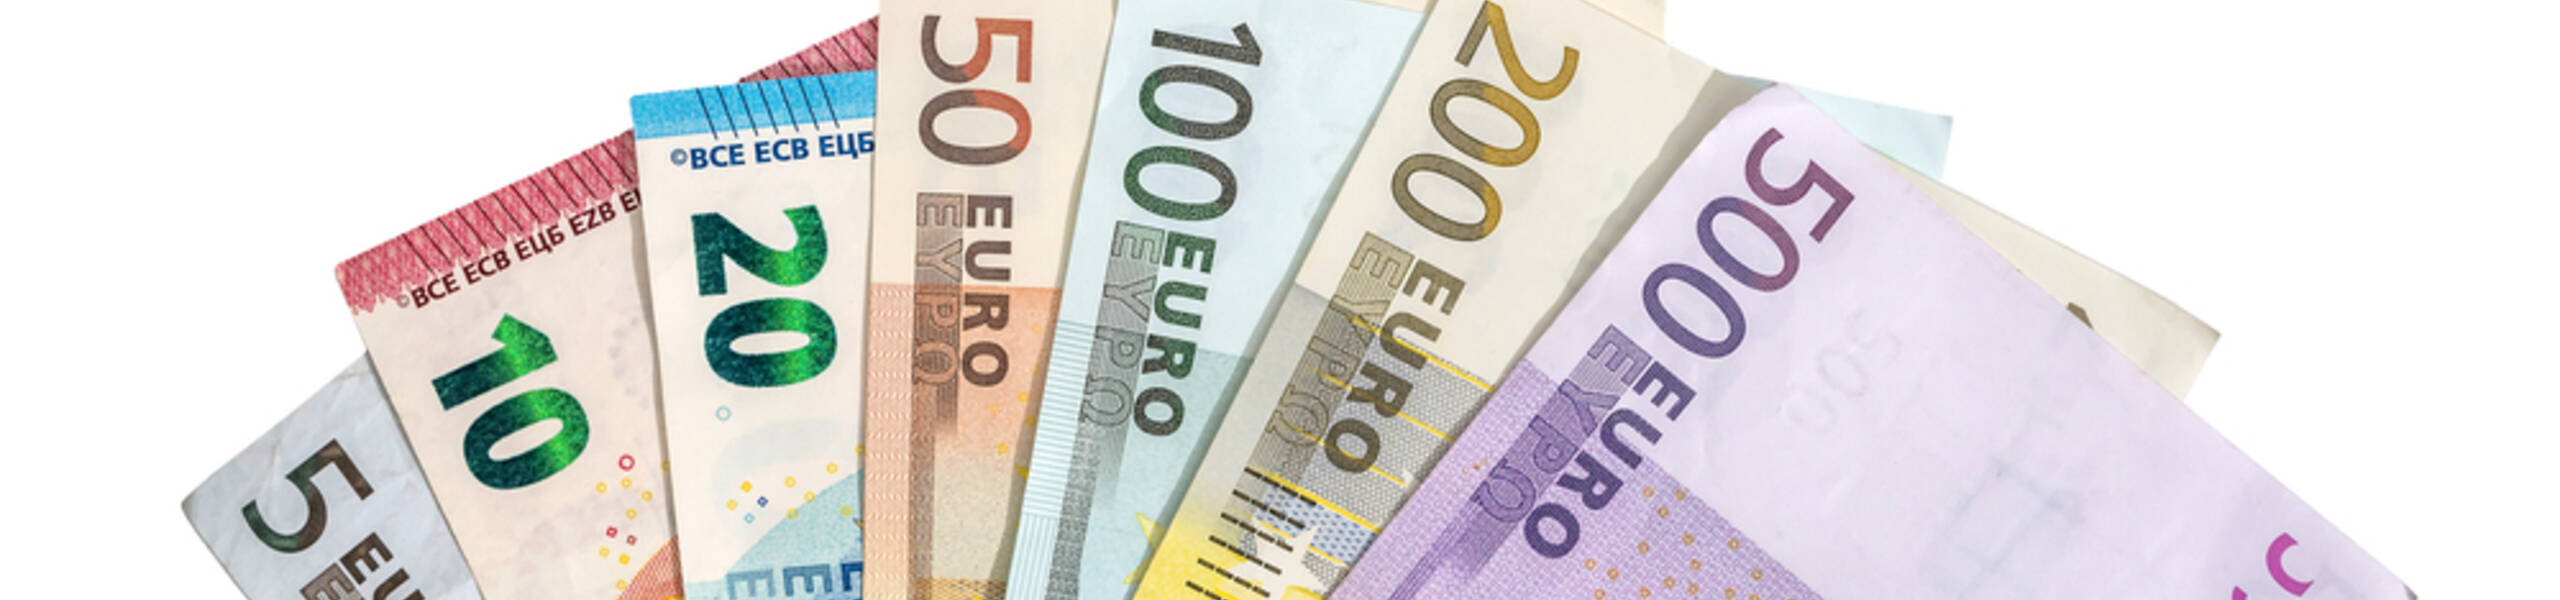 EUR/USD is trading lower before ECB